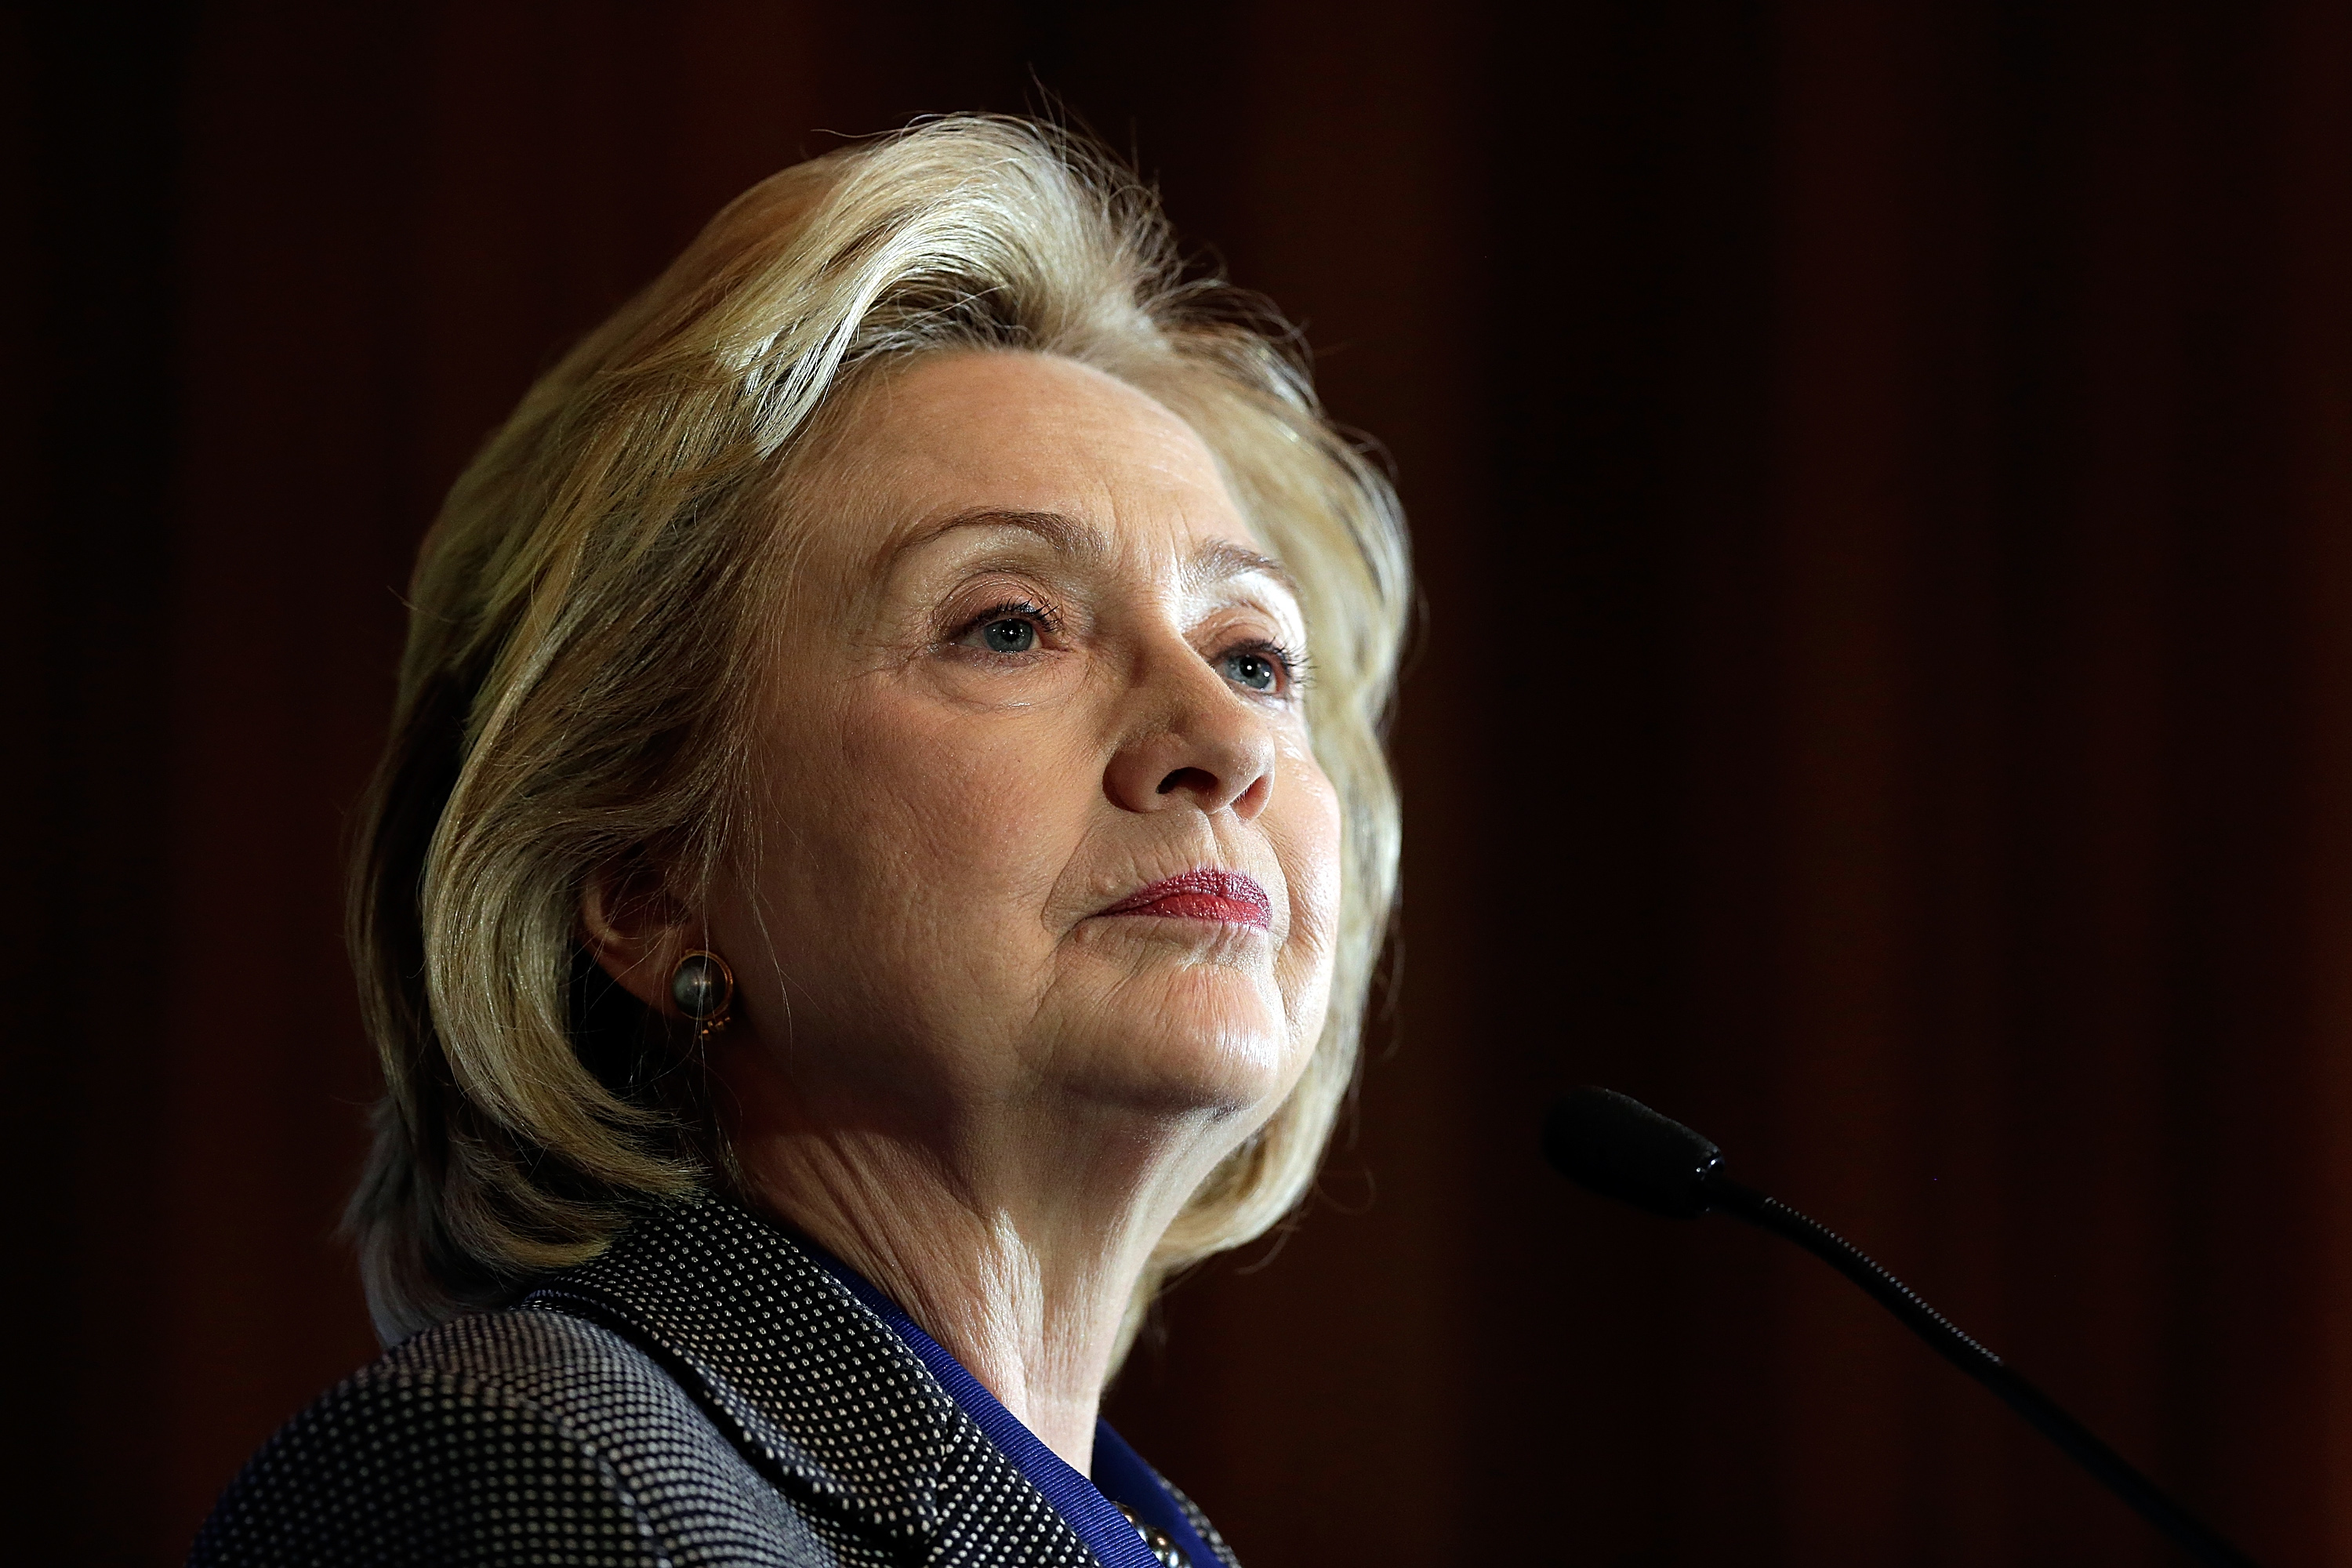 Hillary Clinton Awarded The 2013 Lantos Human Rights Prize